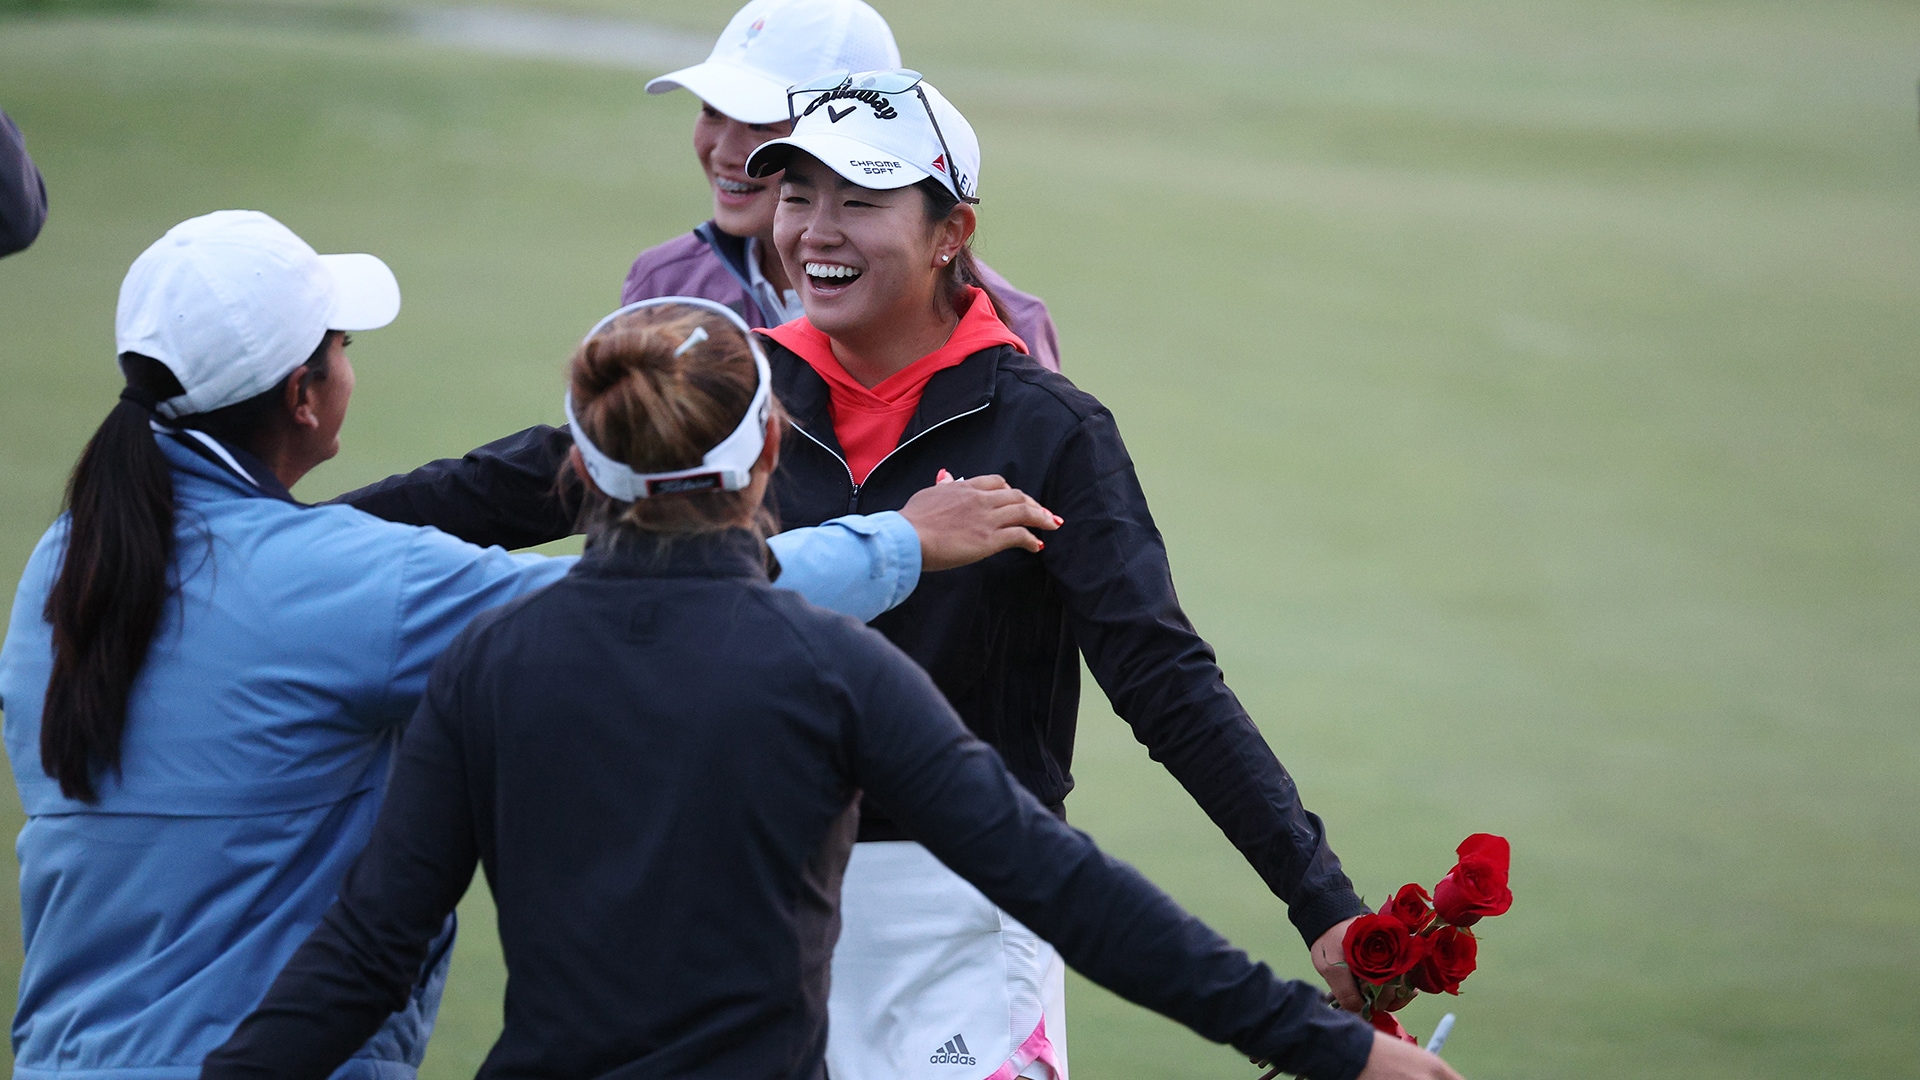 Rose Zhang climbs more than 400 spots in Rolex Rankings with first win